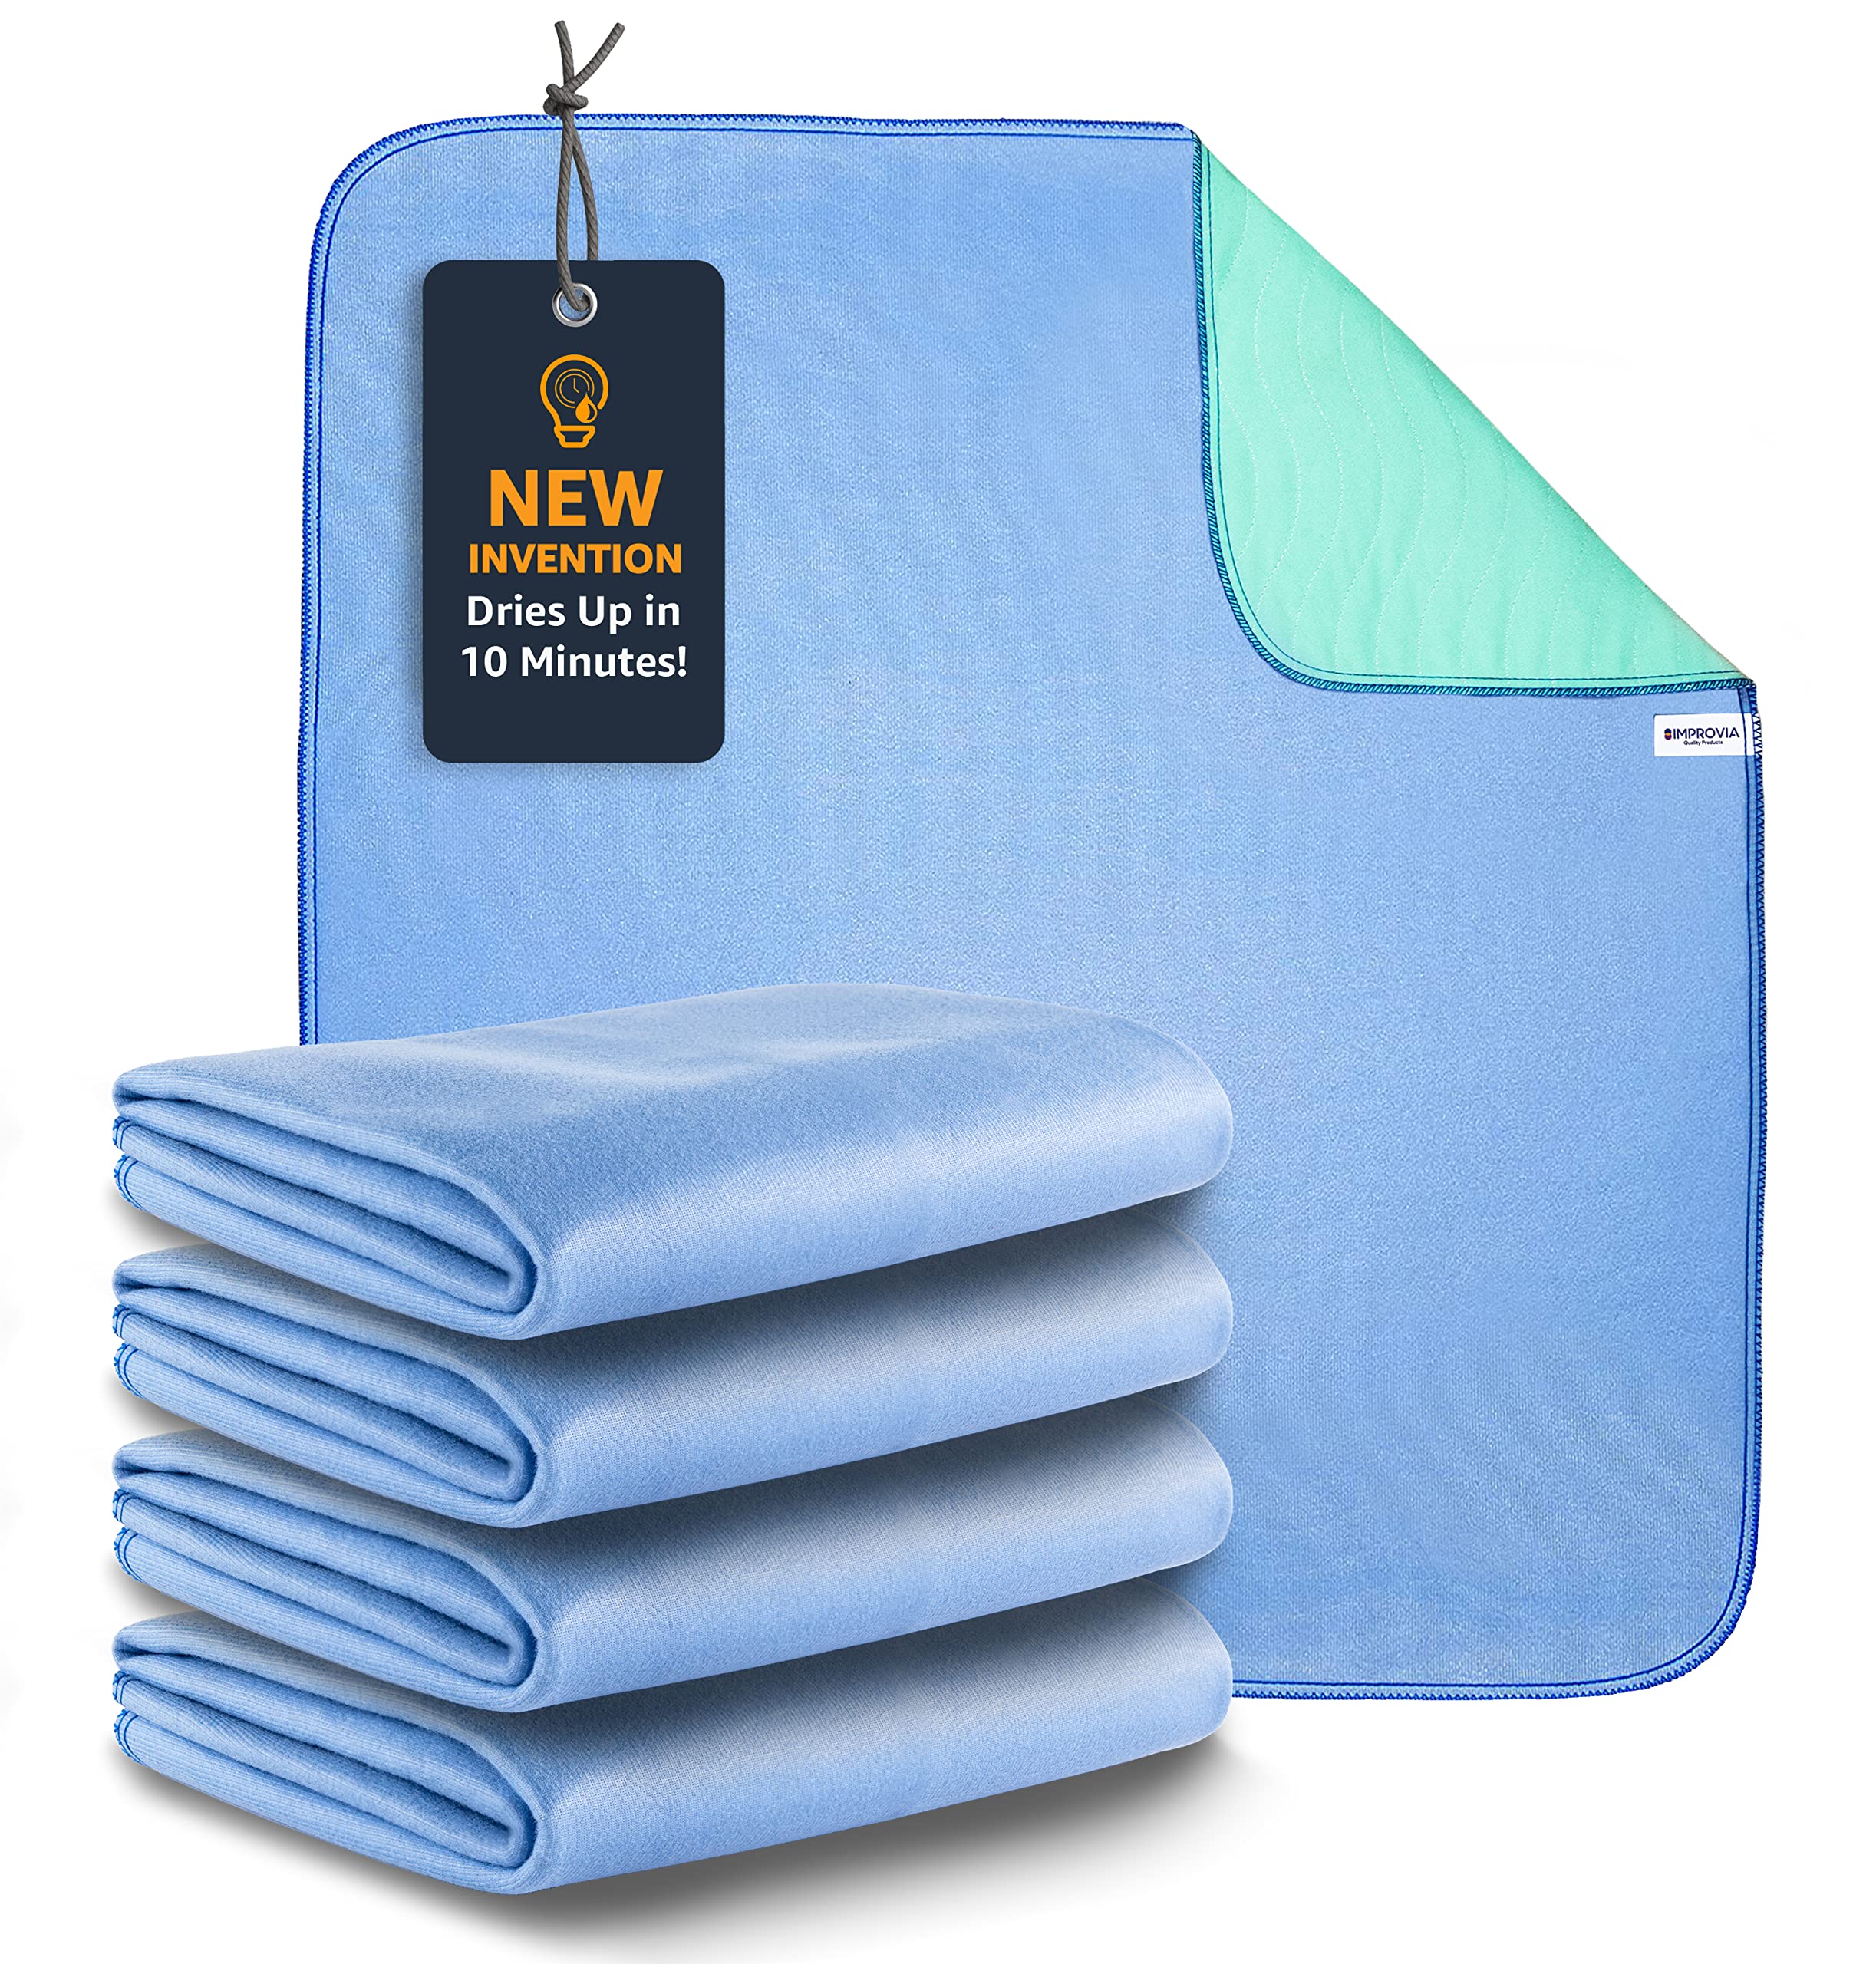 2 REUSABLE WASHABLE UNDERPADS BED PADS 34x36 HOSPITAL GRADE